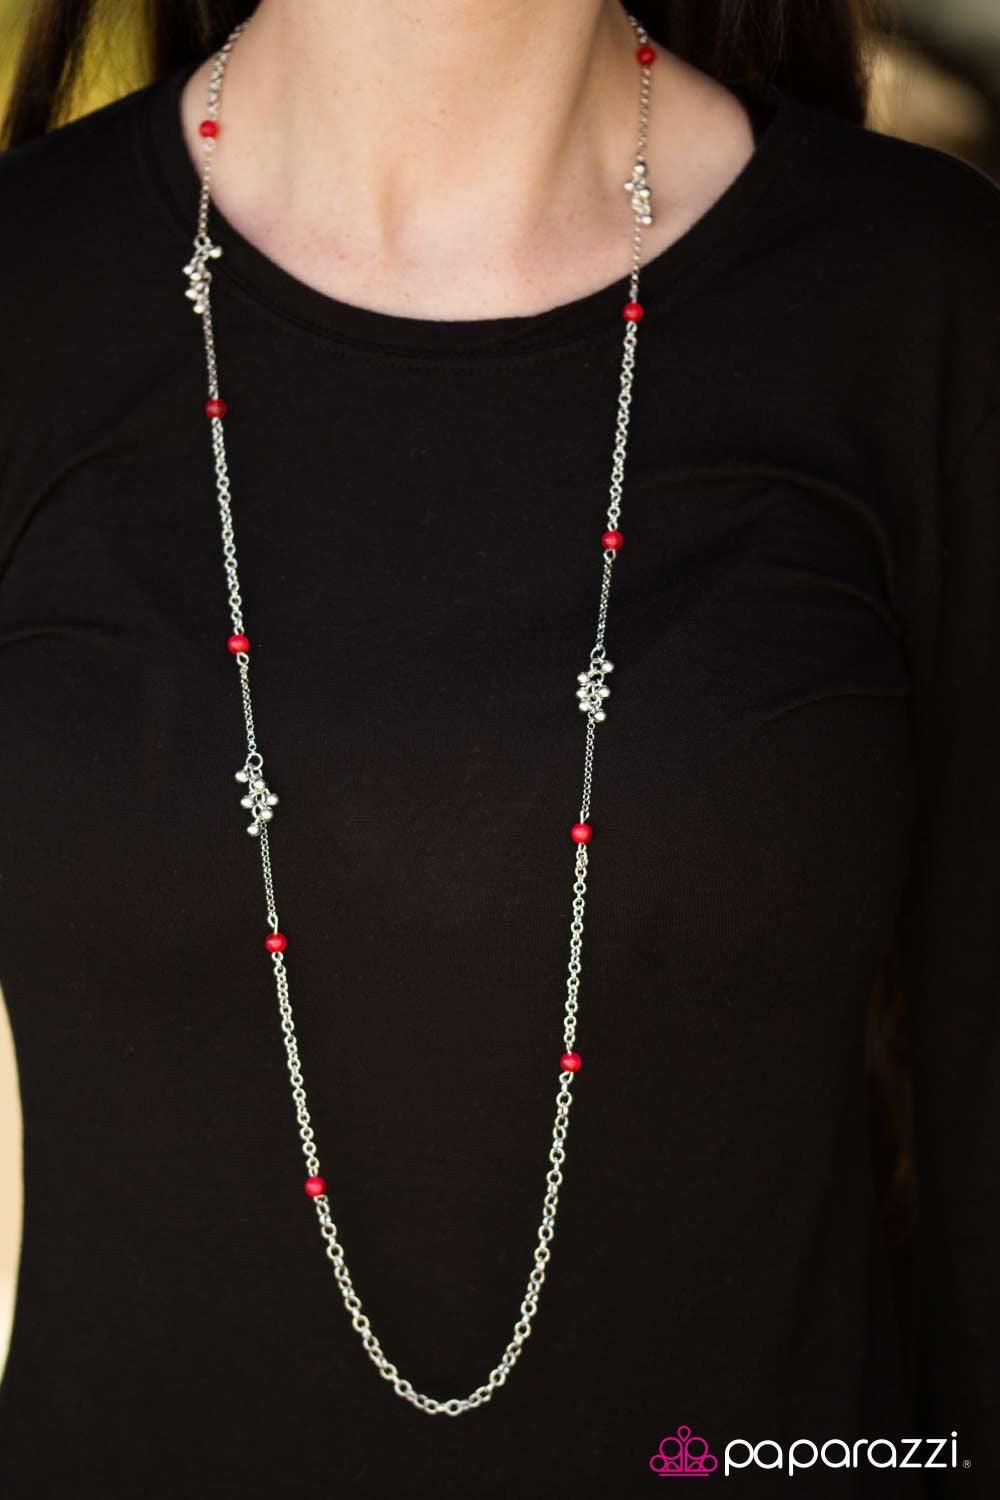 Paparazzi Accessories Twinkling Twilight - Red Red beads trickle down an elongated silver chain, creating a whimsical display. Clusters of dainty silver beads create fun and flirty accents as they trickle down the chain. Features an adjustable clasp closu